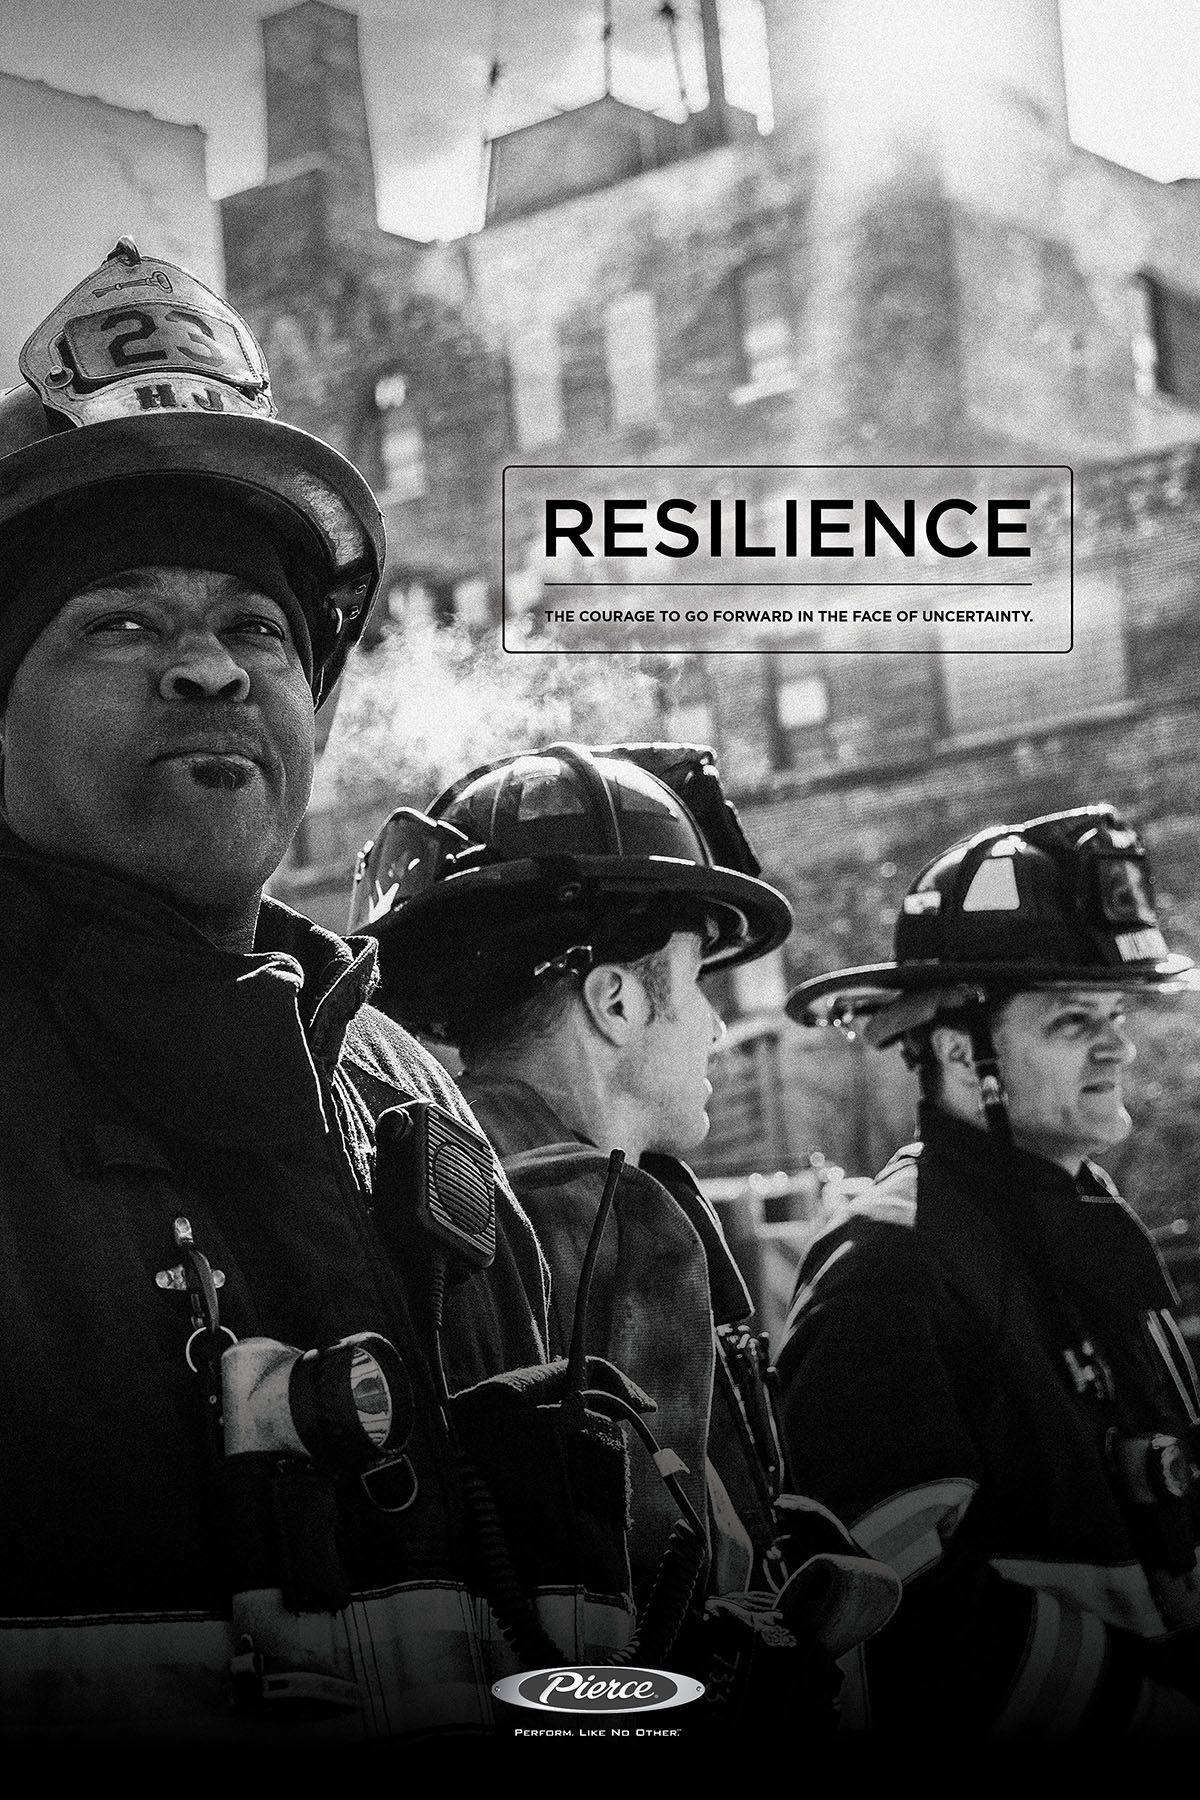 a closeup of three firefighters wearing their helmets and jackets with the headline "Resilience"